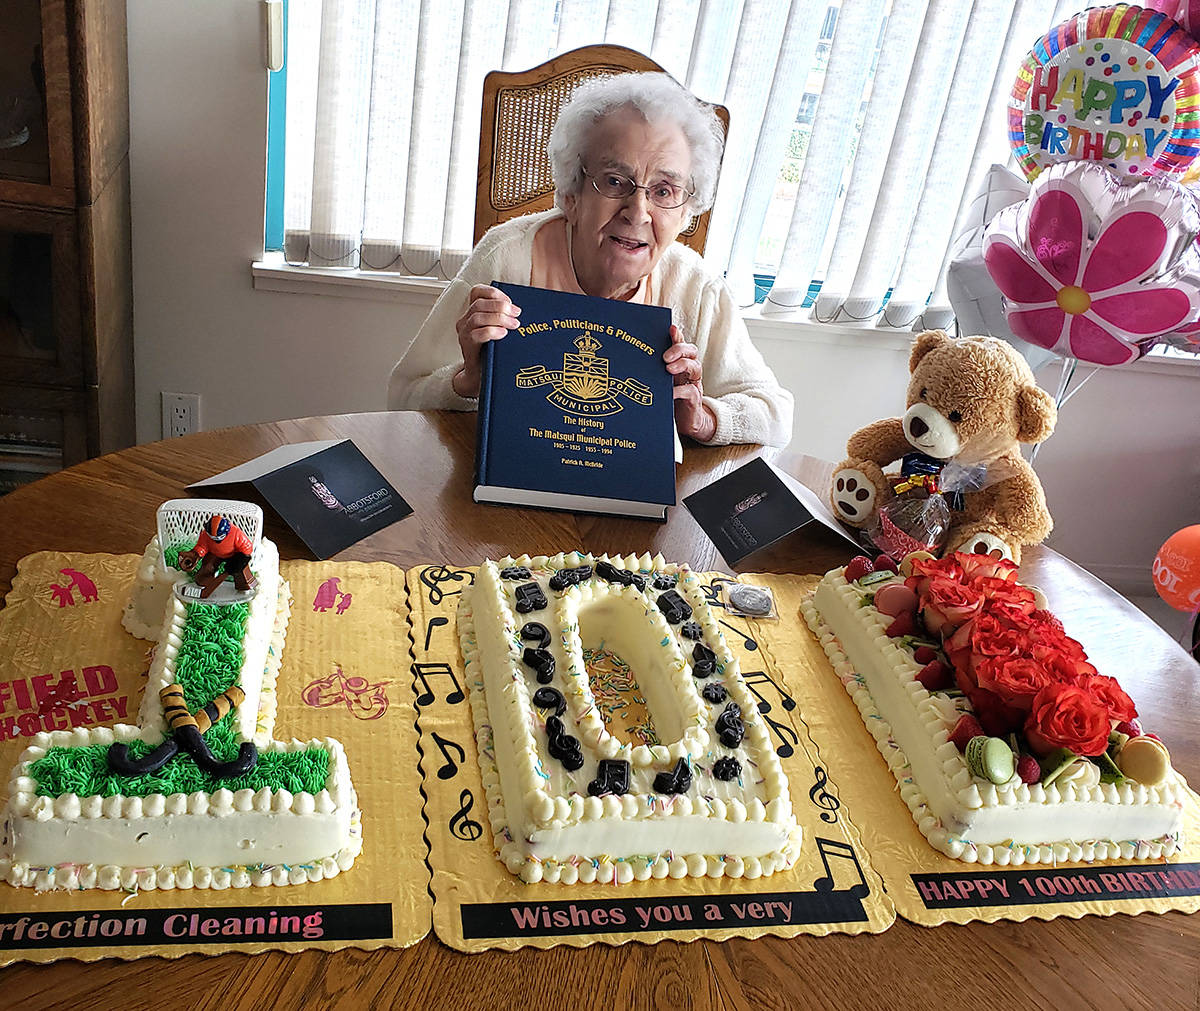 What to Say on 100th Birthday Gift Ideas?